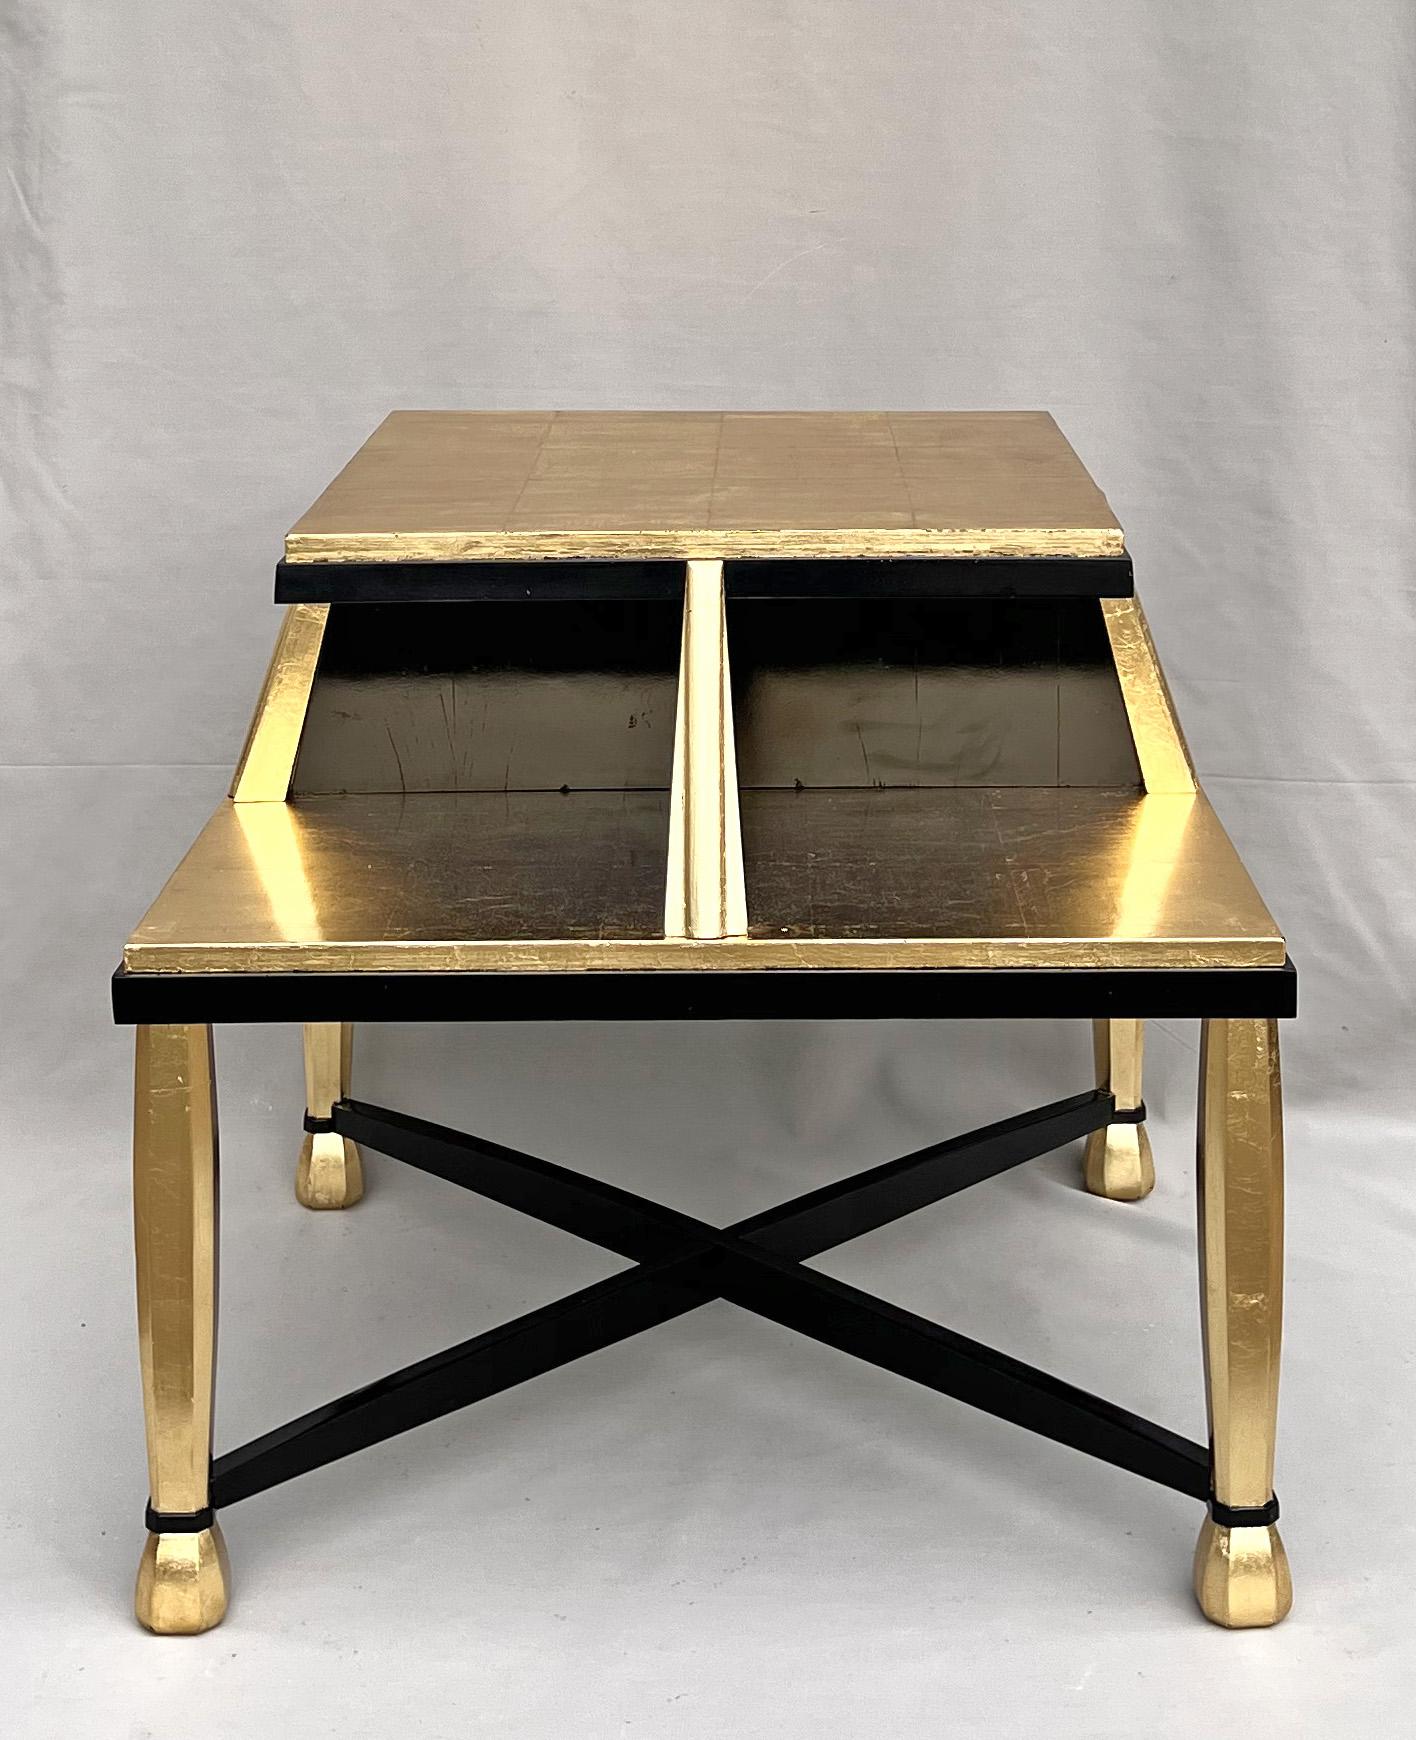 Art Deco Coffee Table in Giltwood and Black Lacquer, 1930s For Sale 10